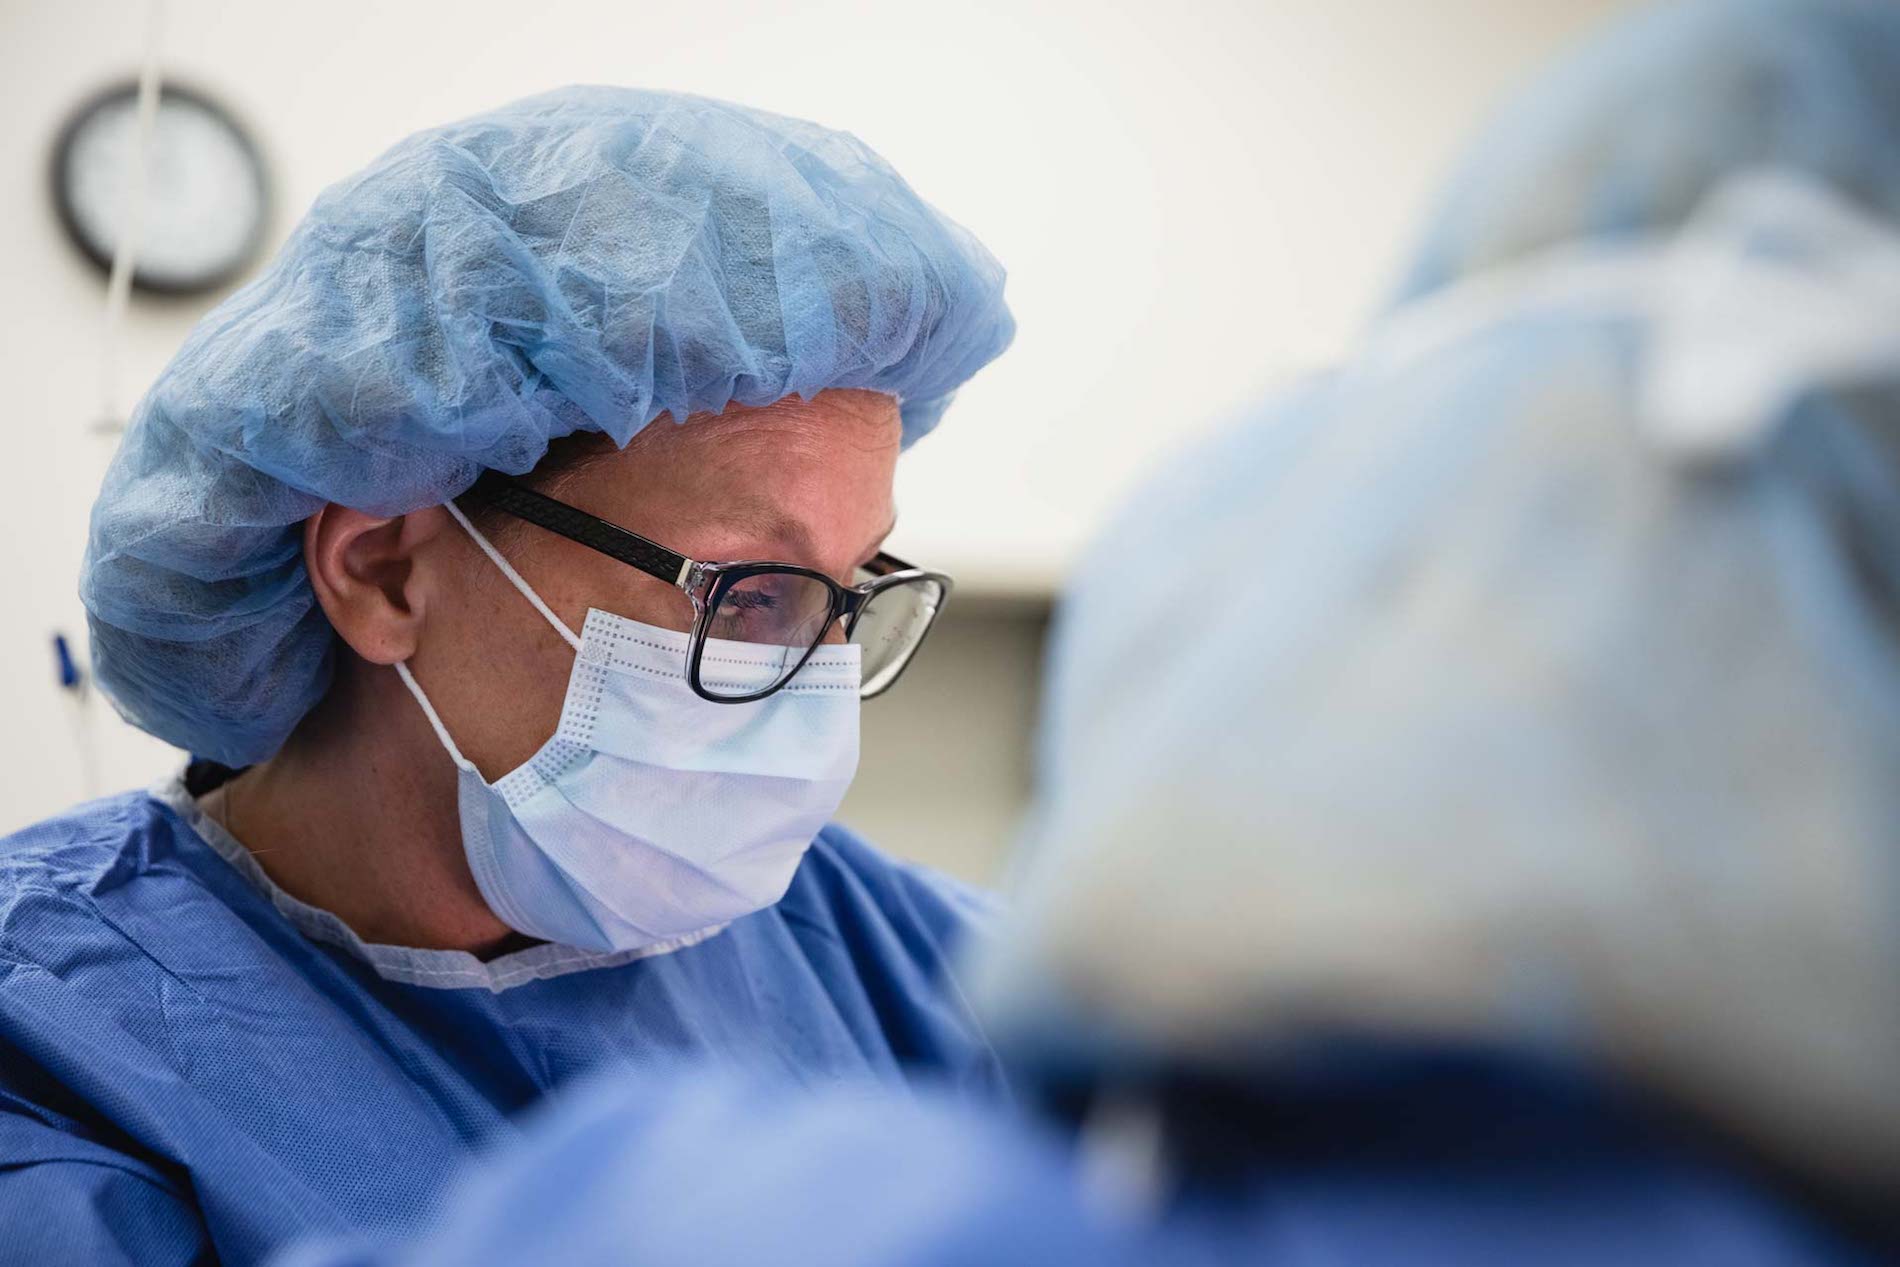 A surgeon operates for double chin surgery